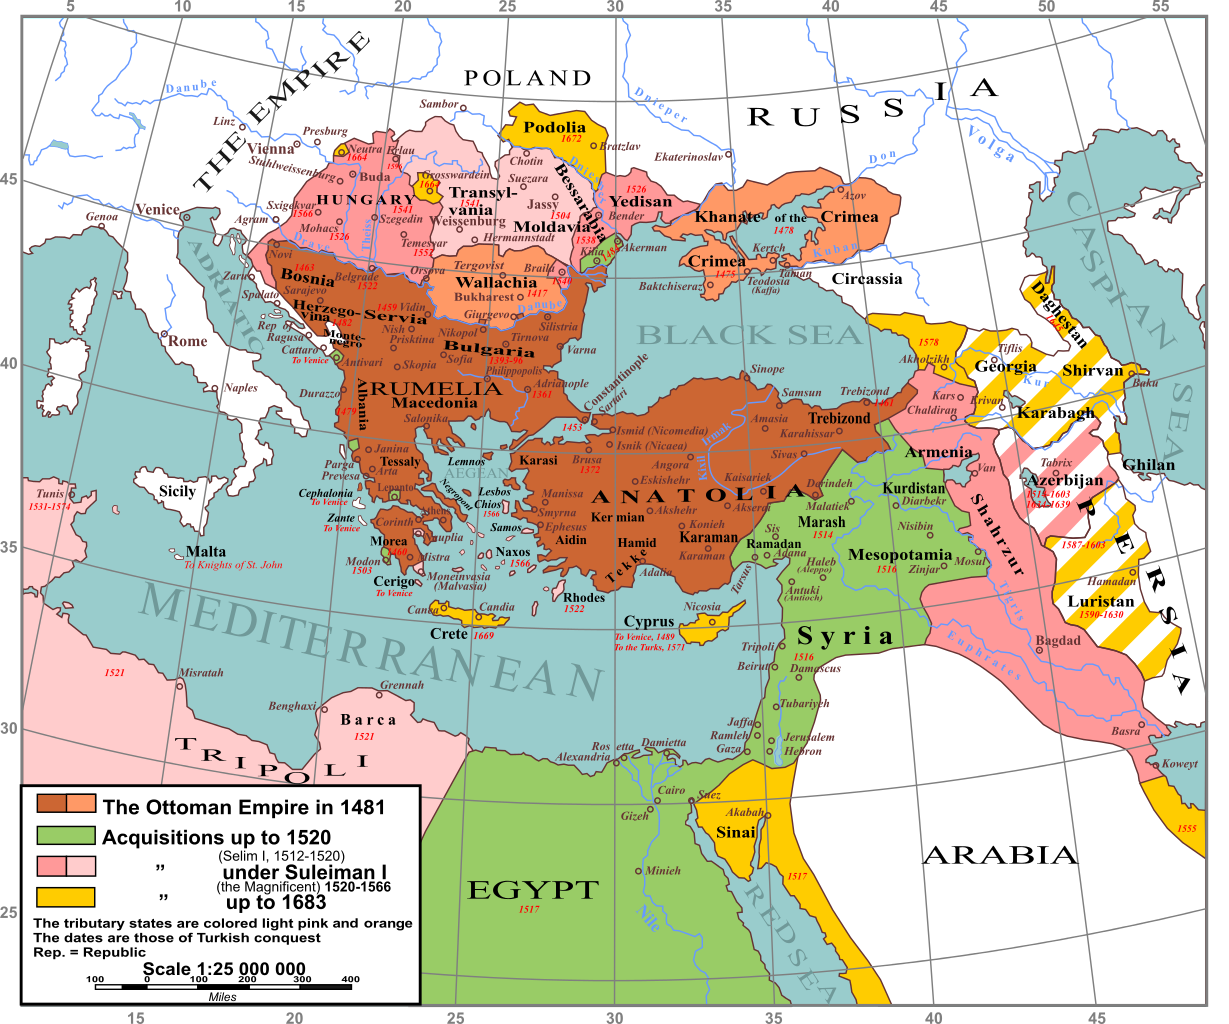 Map includes northern Africa from Tunis eastward to Eygpt and extends around the eastern portion of the Mediterranean Sea to include Syria and Sinai. It then extends eastward to through Persia (modern day Iraq), north and westward to Anatolia and Rumelia (modern day Turkey and Greece), and northward from Rumelia to Hungary and Transylvania into modern day Poland. 